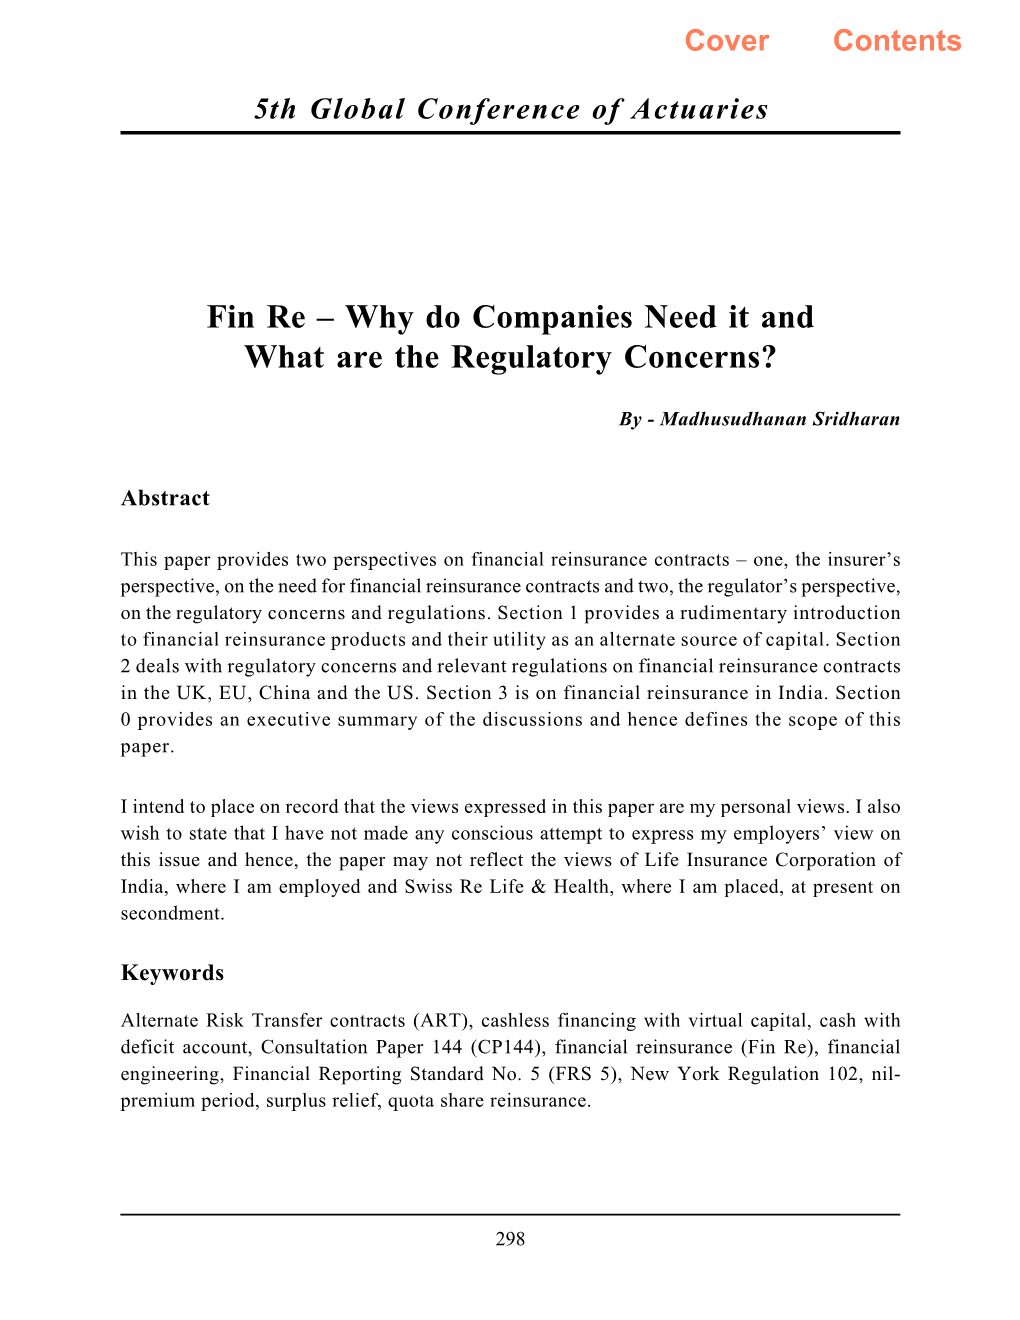 Fin Re – Why Do Companies Need It and What Are the Regulatory Concerns?